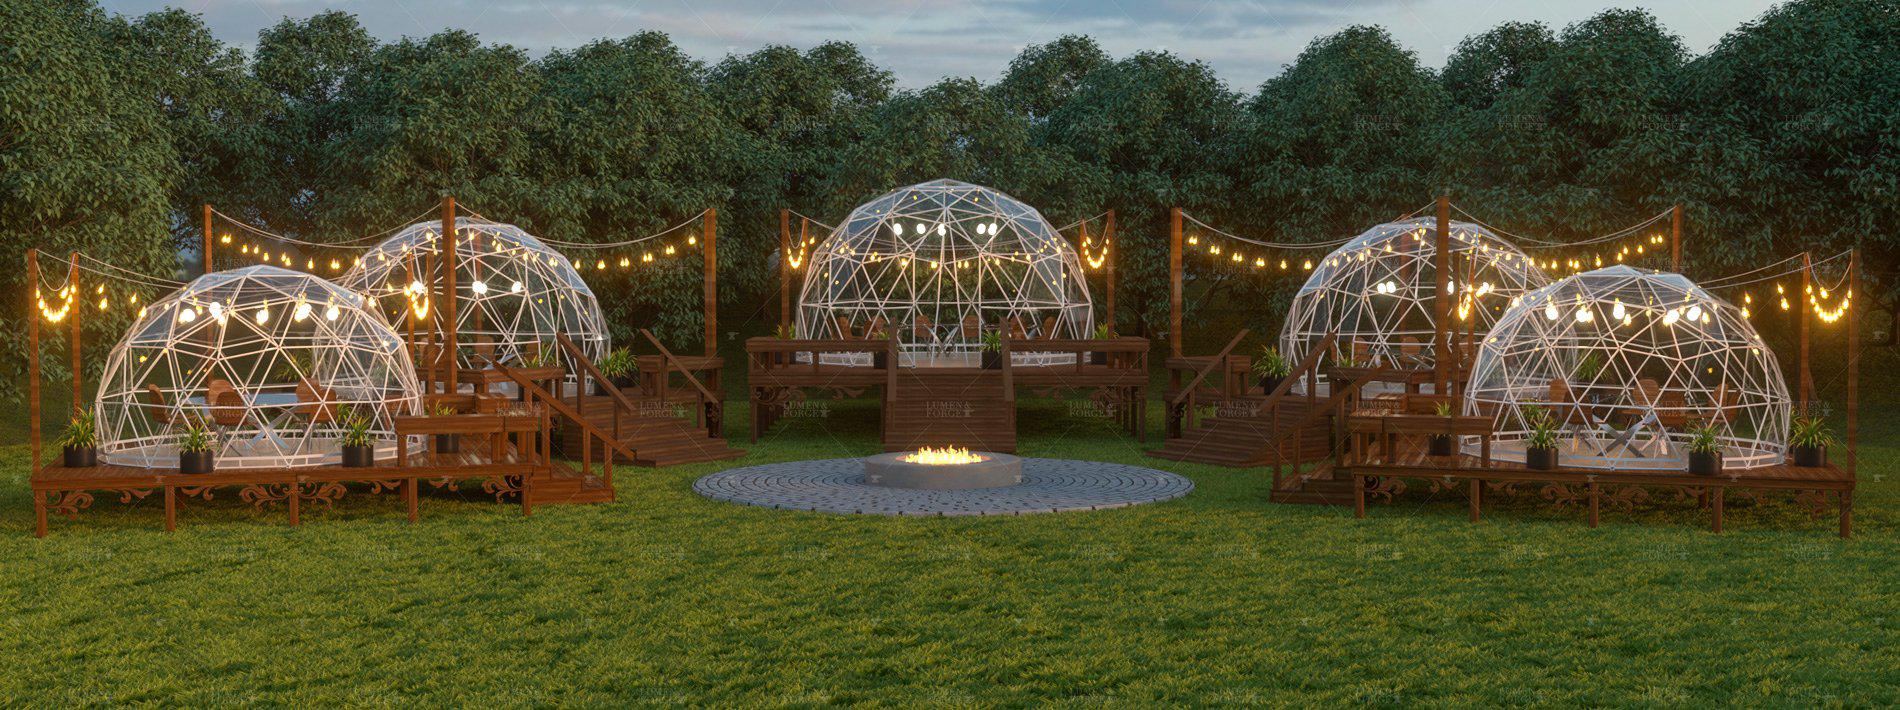 Lumen & Forge Geodesic Greenhouse Dome Kit - 20ft